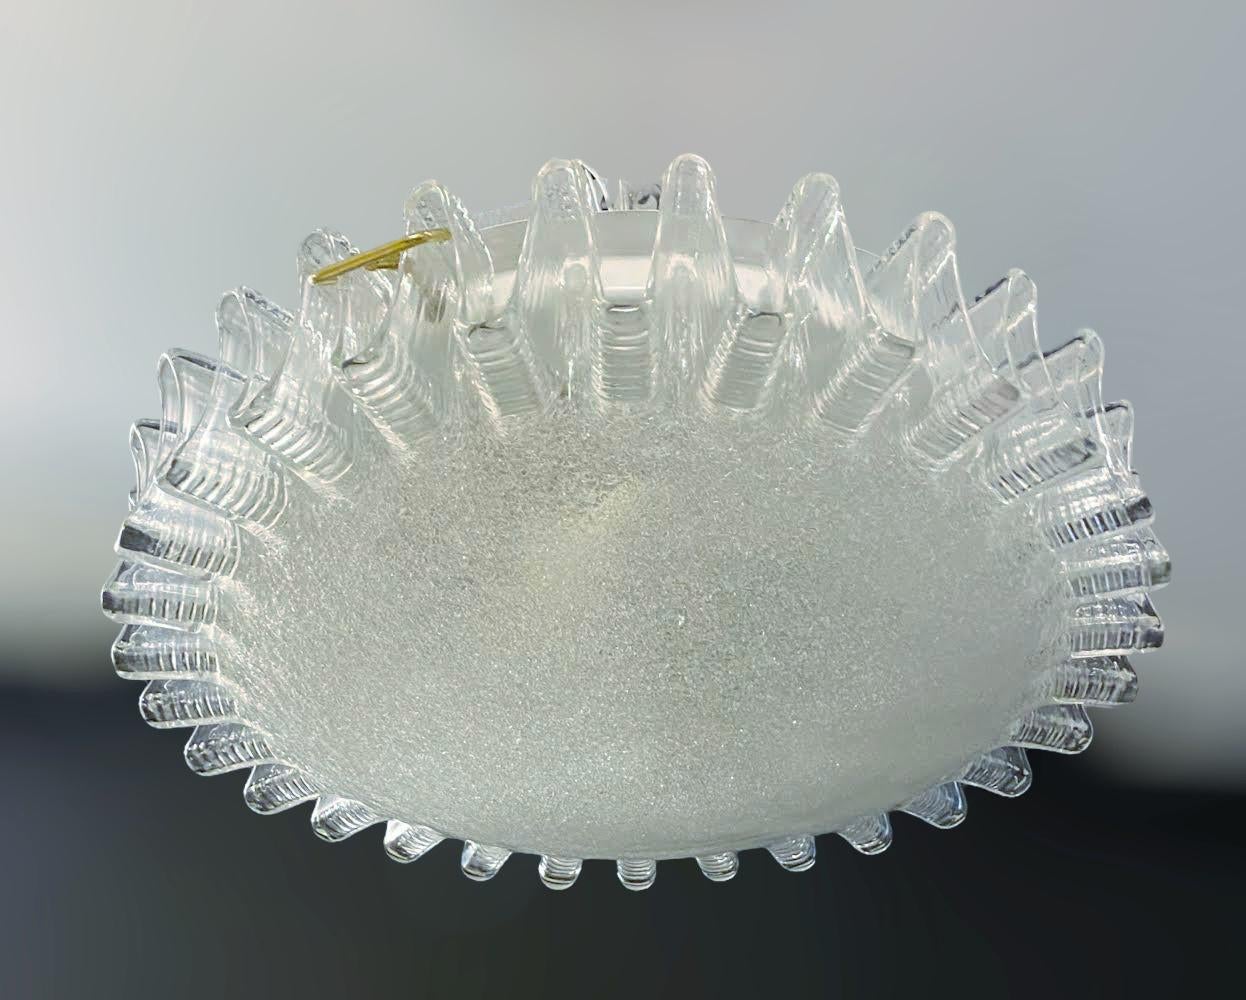 Vintage Italian flush mount of a circular graniglia Murano glass shade with ribbed edge mounted on white metal frame / Made in Italy, circa 1960s
Measures: diameter 16 inches, height 4 inches
2 lights / E26 or E27 type / max 60W each
1 available in